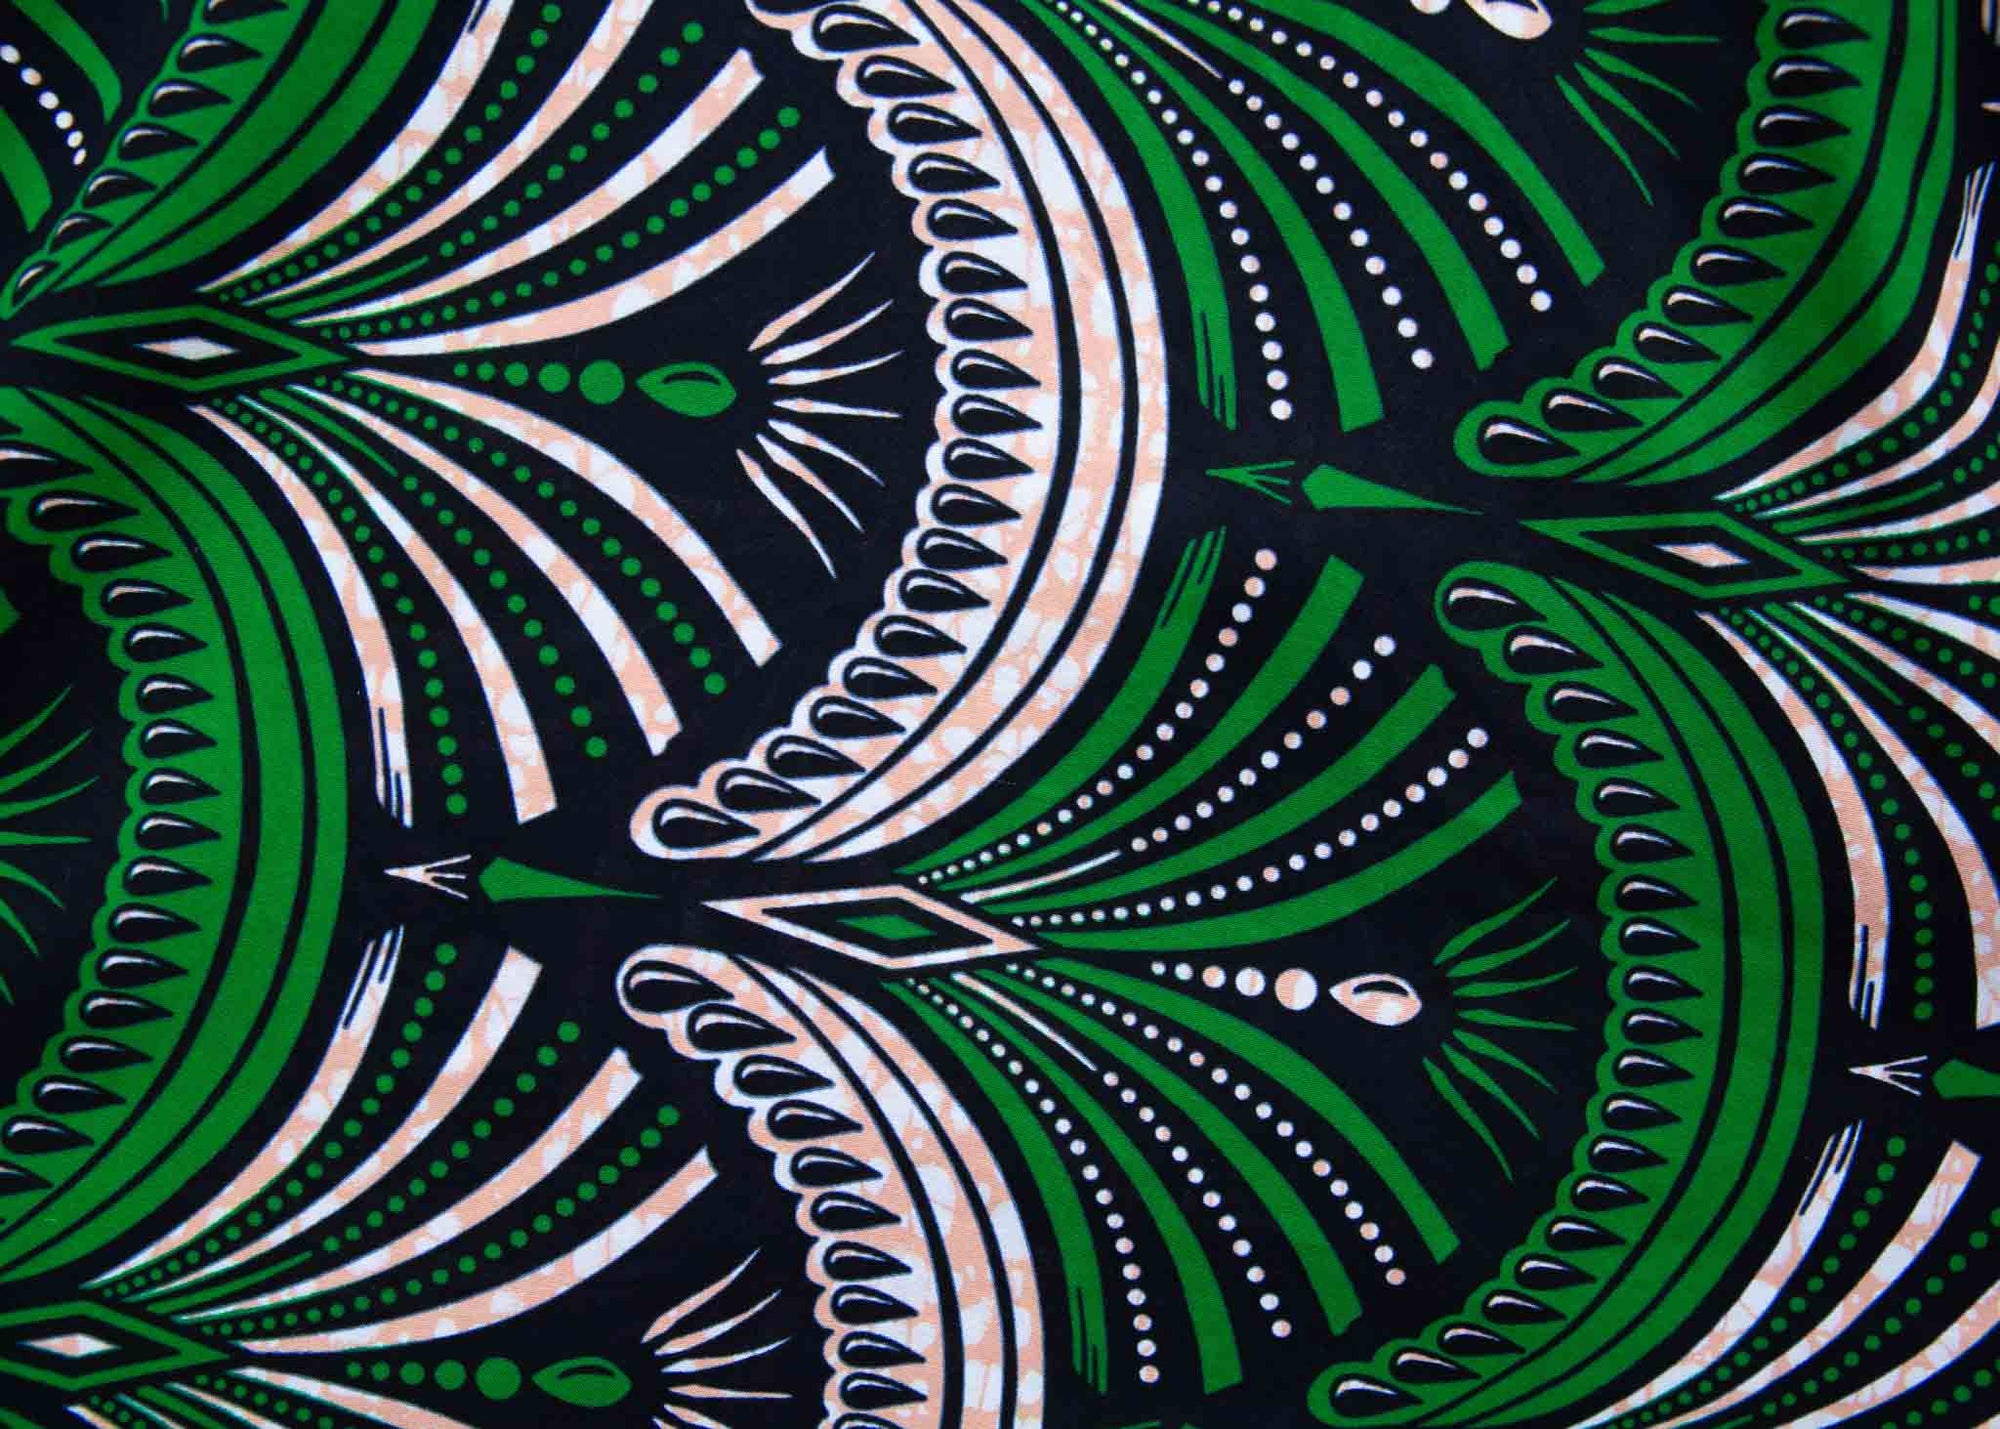 Display of green, white and black abstract print dress.